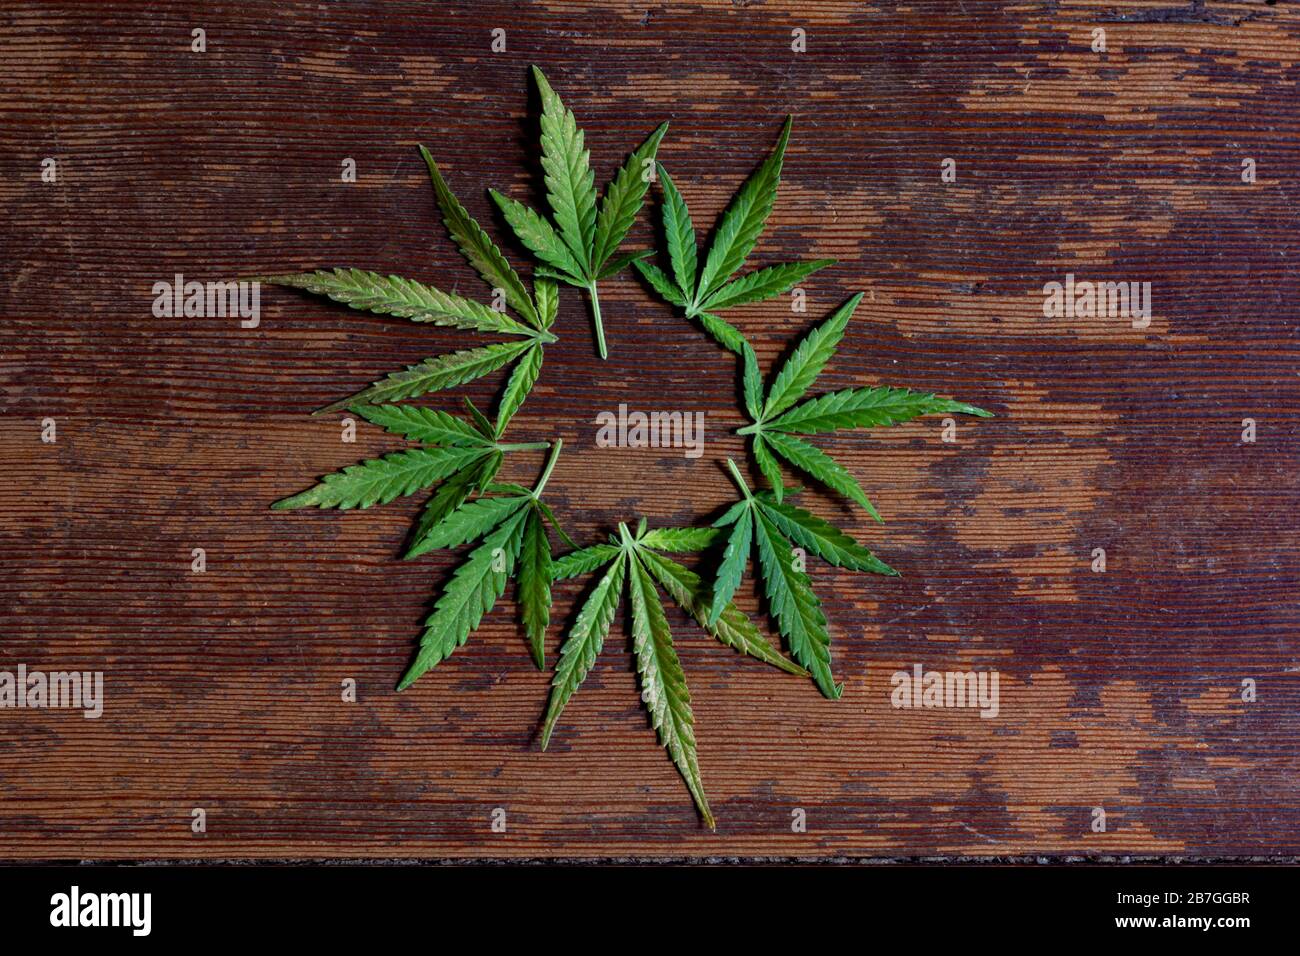 Green leaves of a marijuana plant disposed on a brown wooden table on a circle. Stock Photo